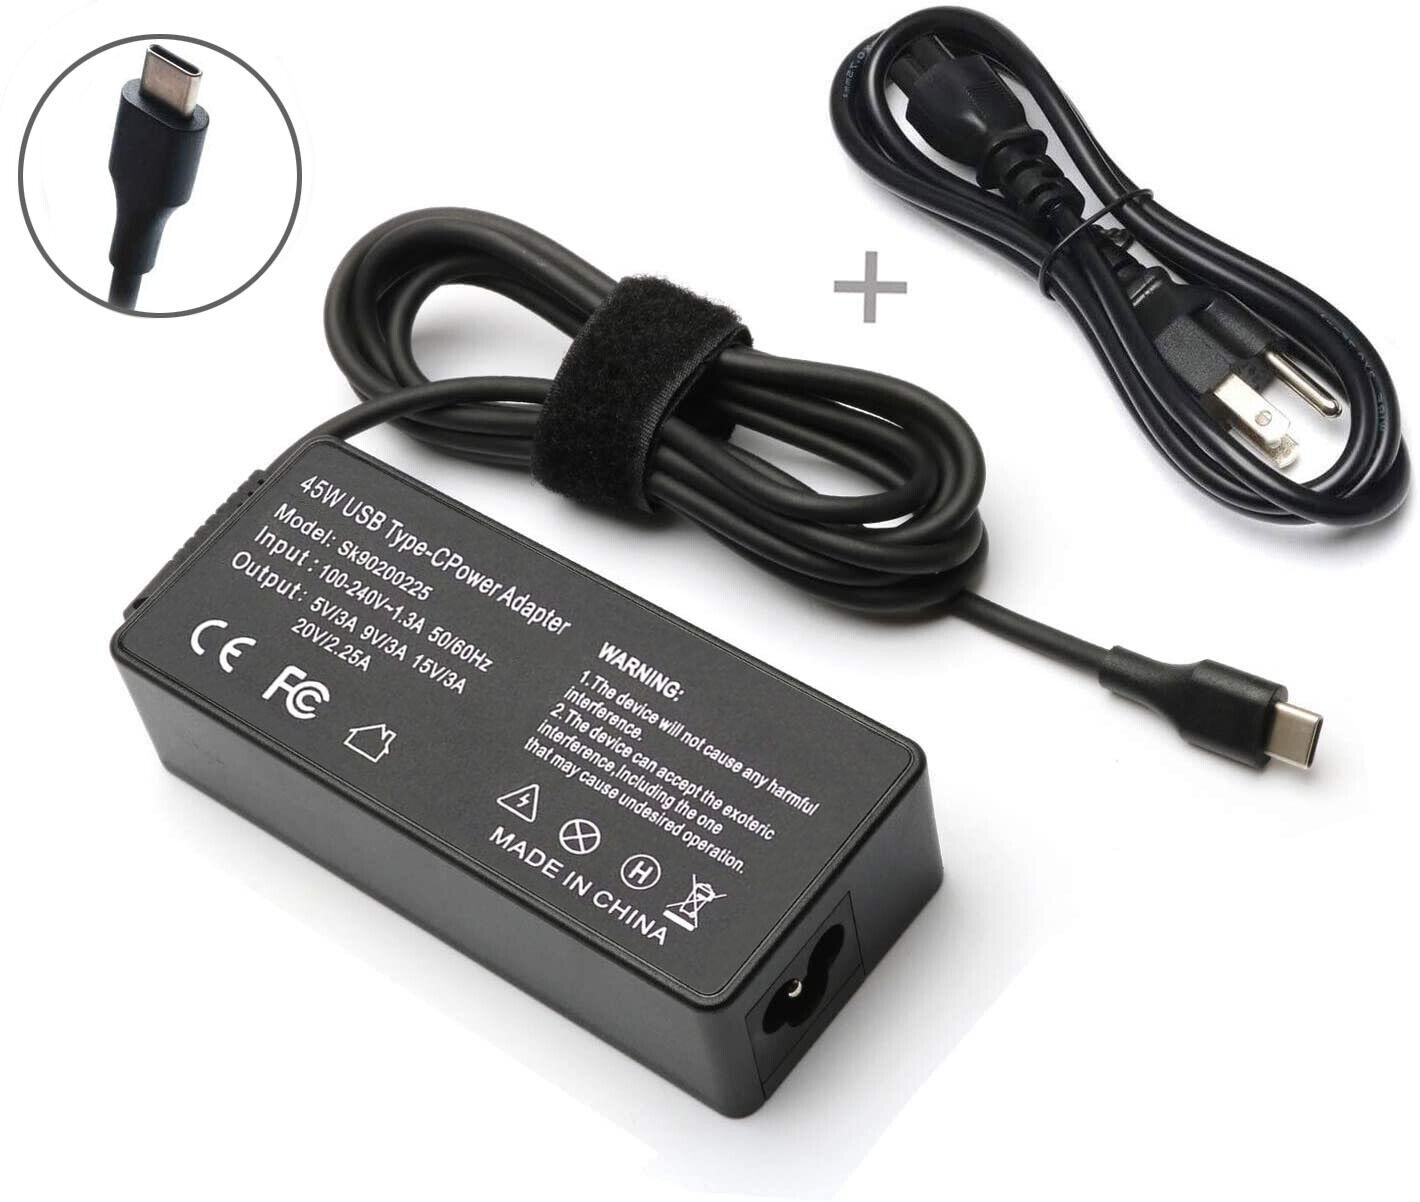 AC Adapter For Lenovo Chromebook C340-11 Type 81TA 81TA0010US Charger Power Cord